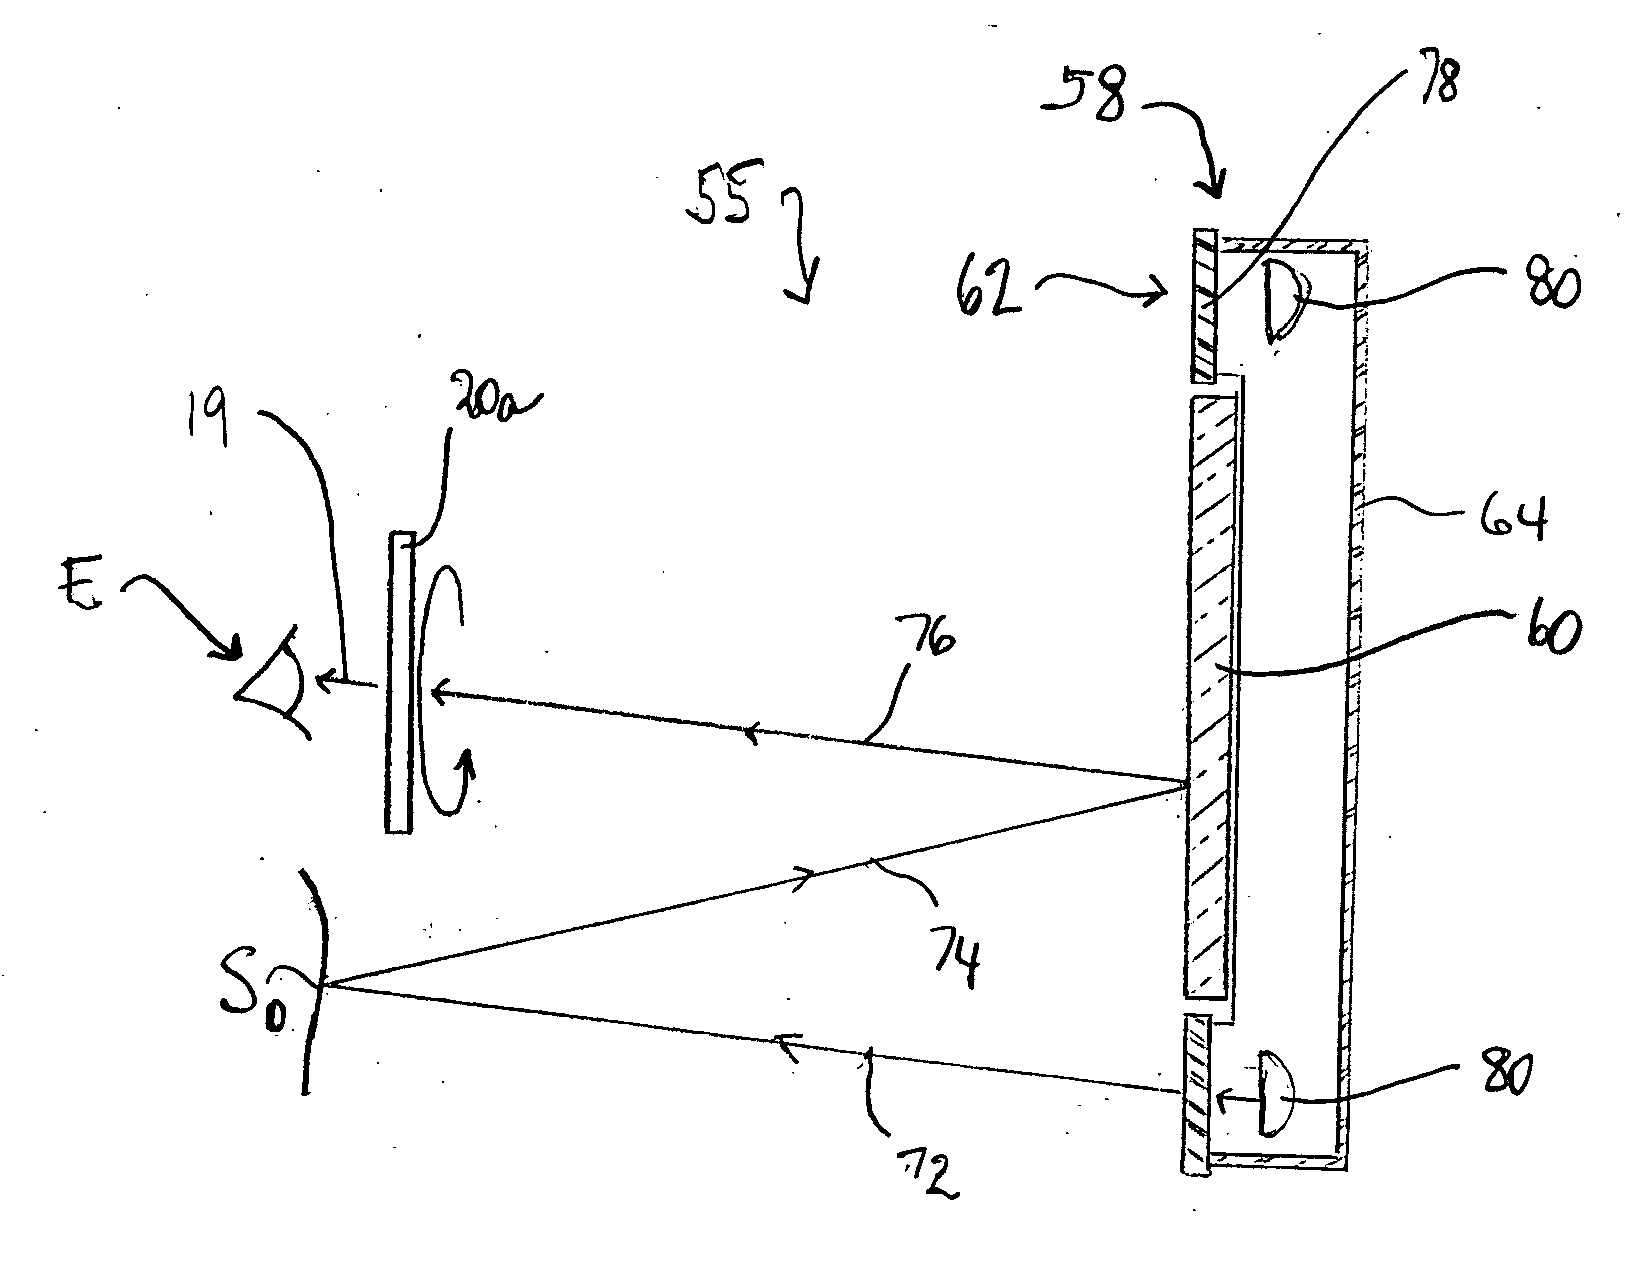 Apparatus and method for viewing the skin